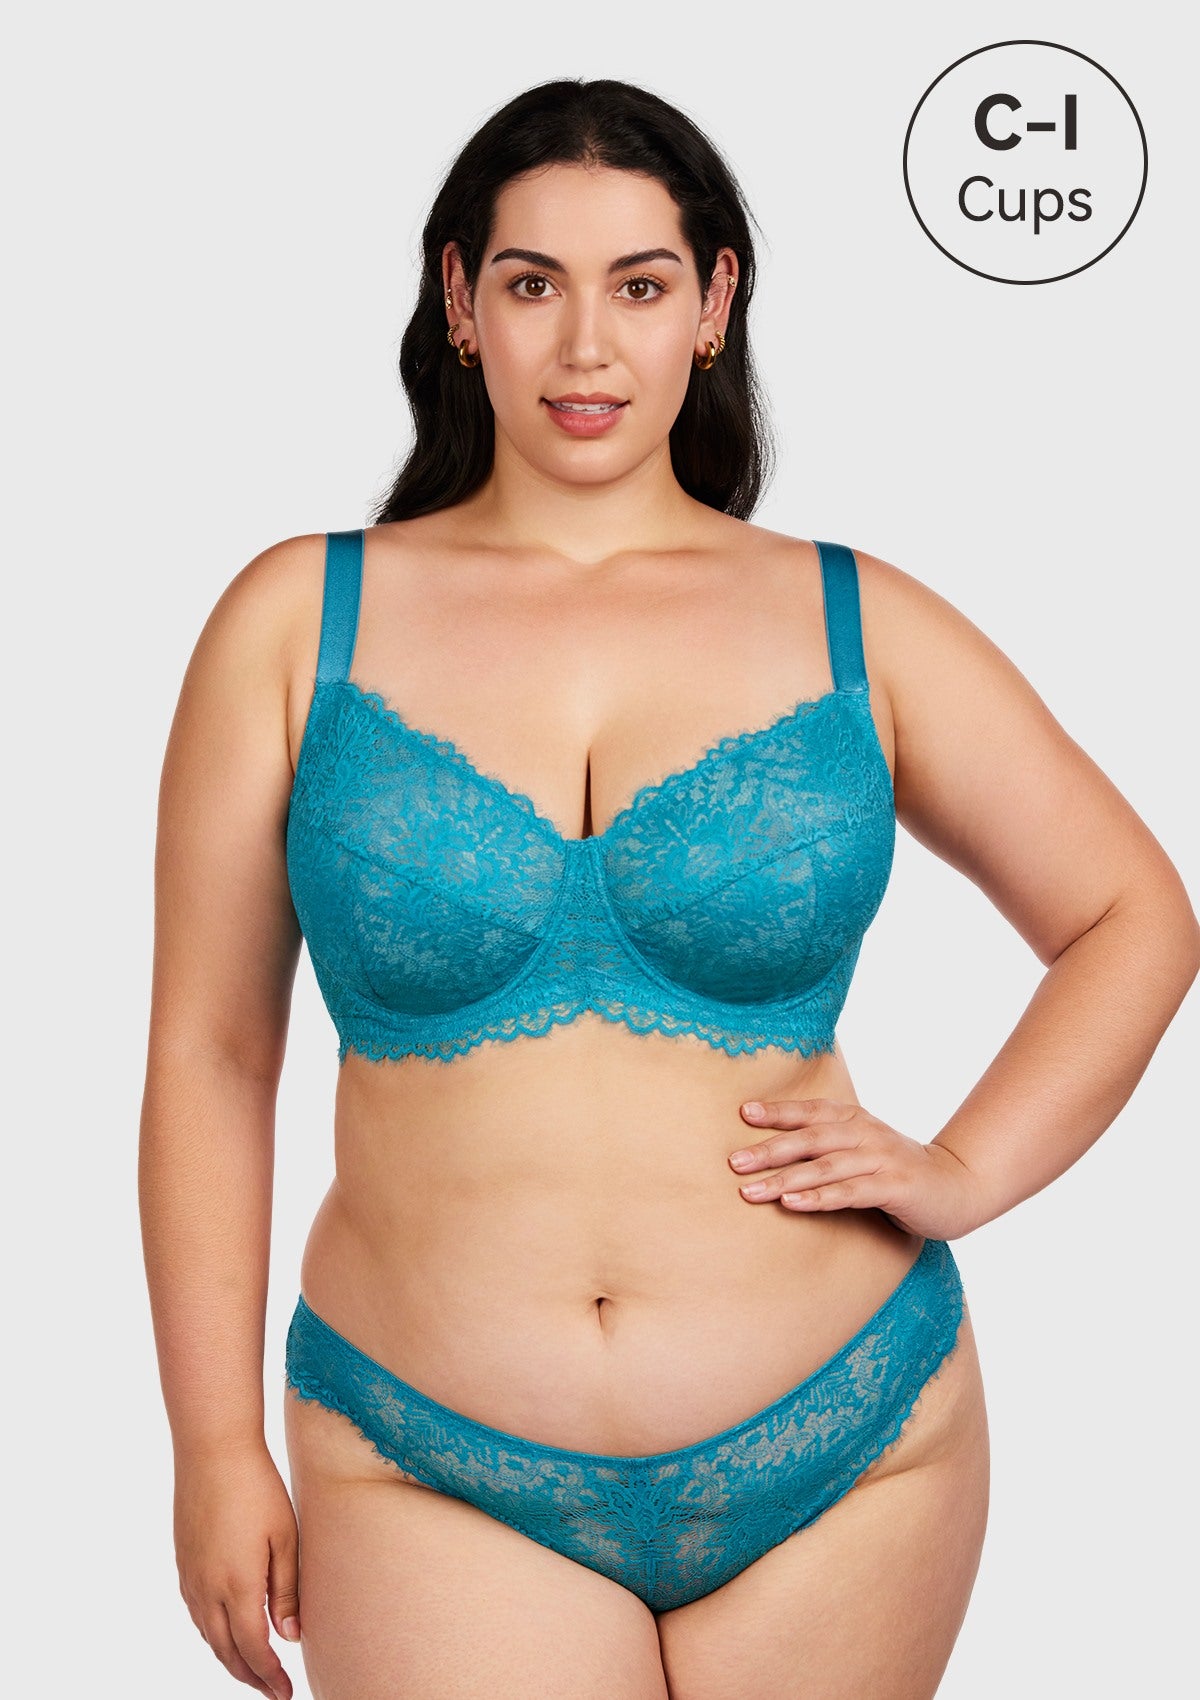 HSIA Sunflower Unlined Lace Bra: Best Bra For Wide Set Breasts - Horizon Blue / 36 / G